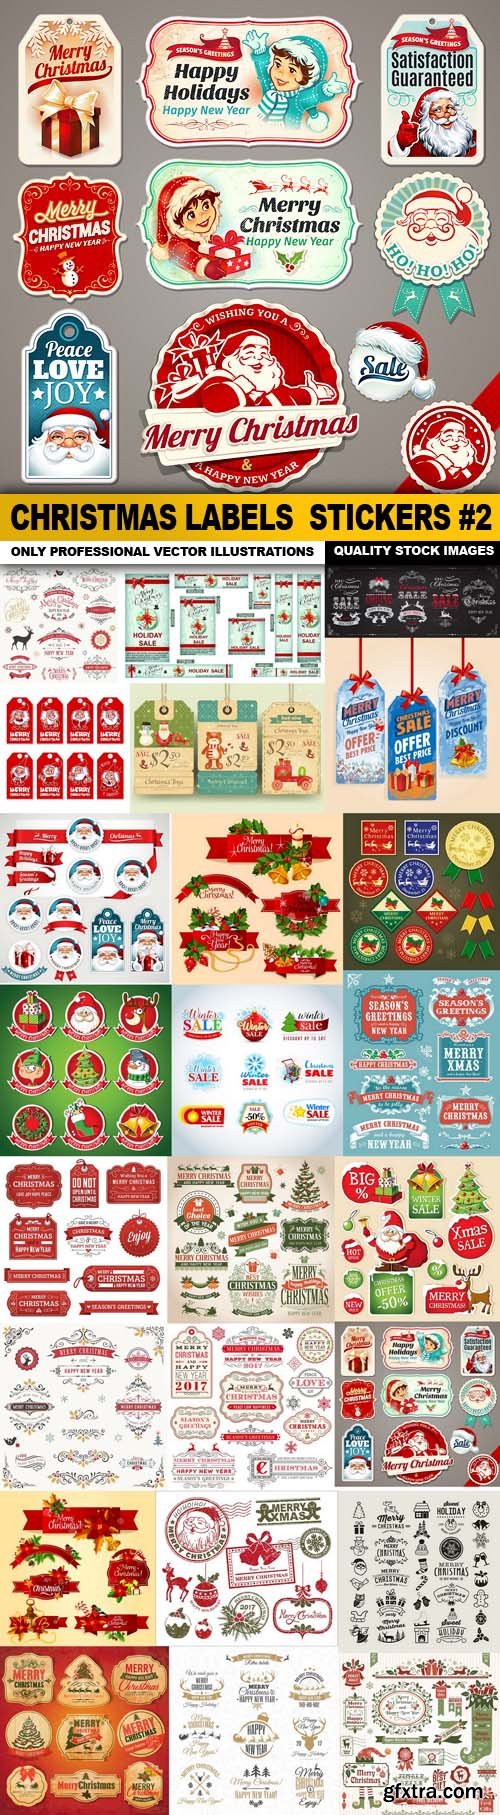 Christmas Labels & Stickers #2, 25xEPS